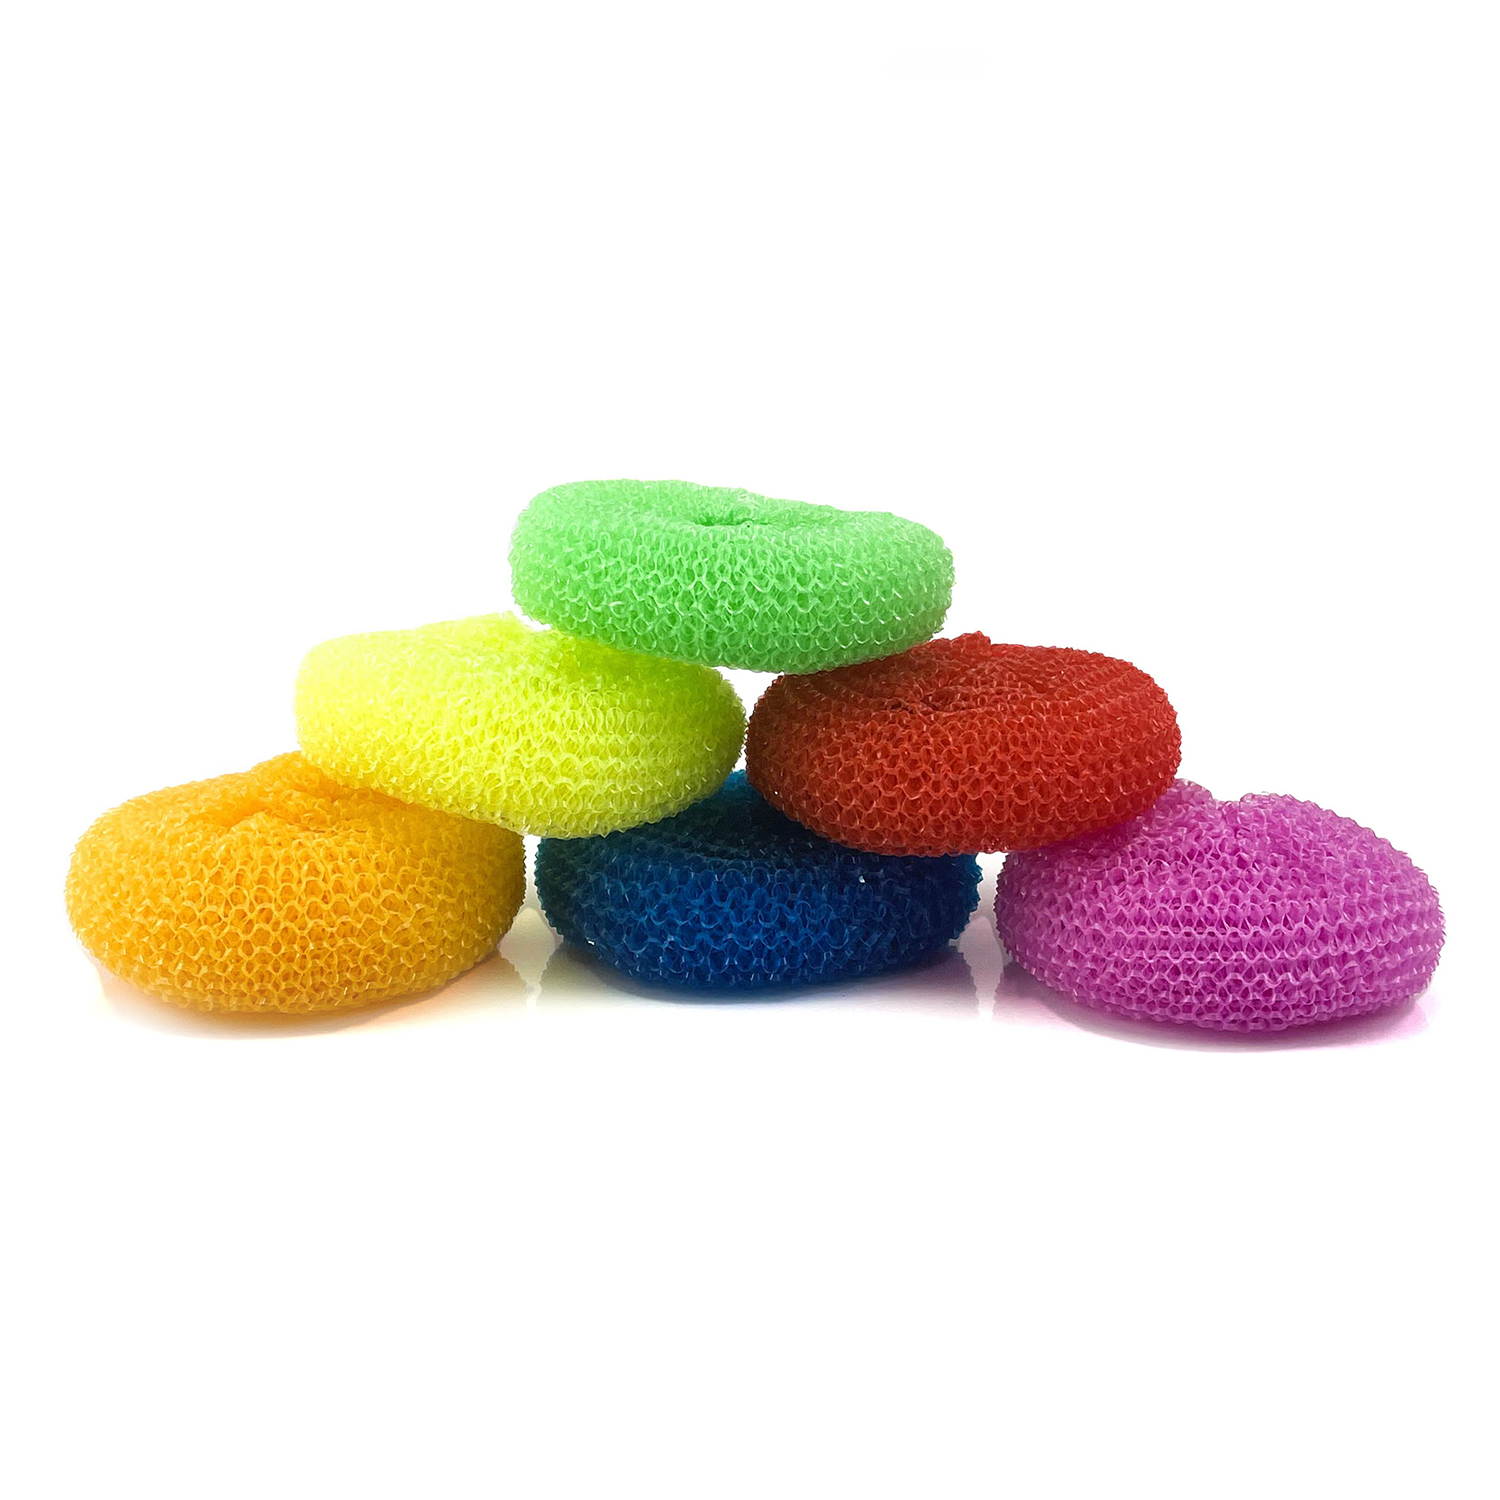 Cleaning Ball Flexible Dish Scrubber Plastic No Odor Durable Removing Rust Scouring Pad Cookware Cleaner Cleaning Ball